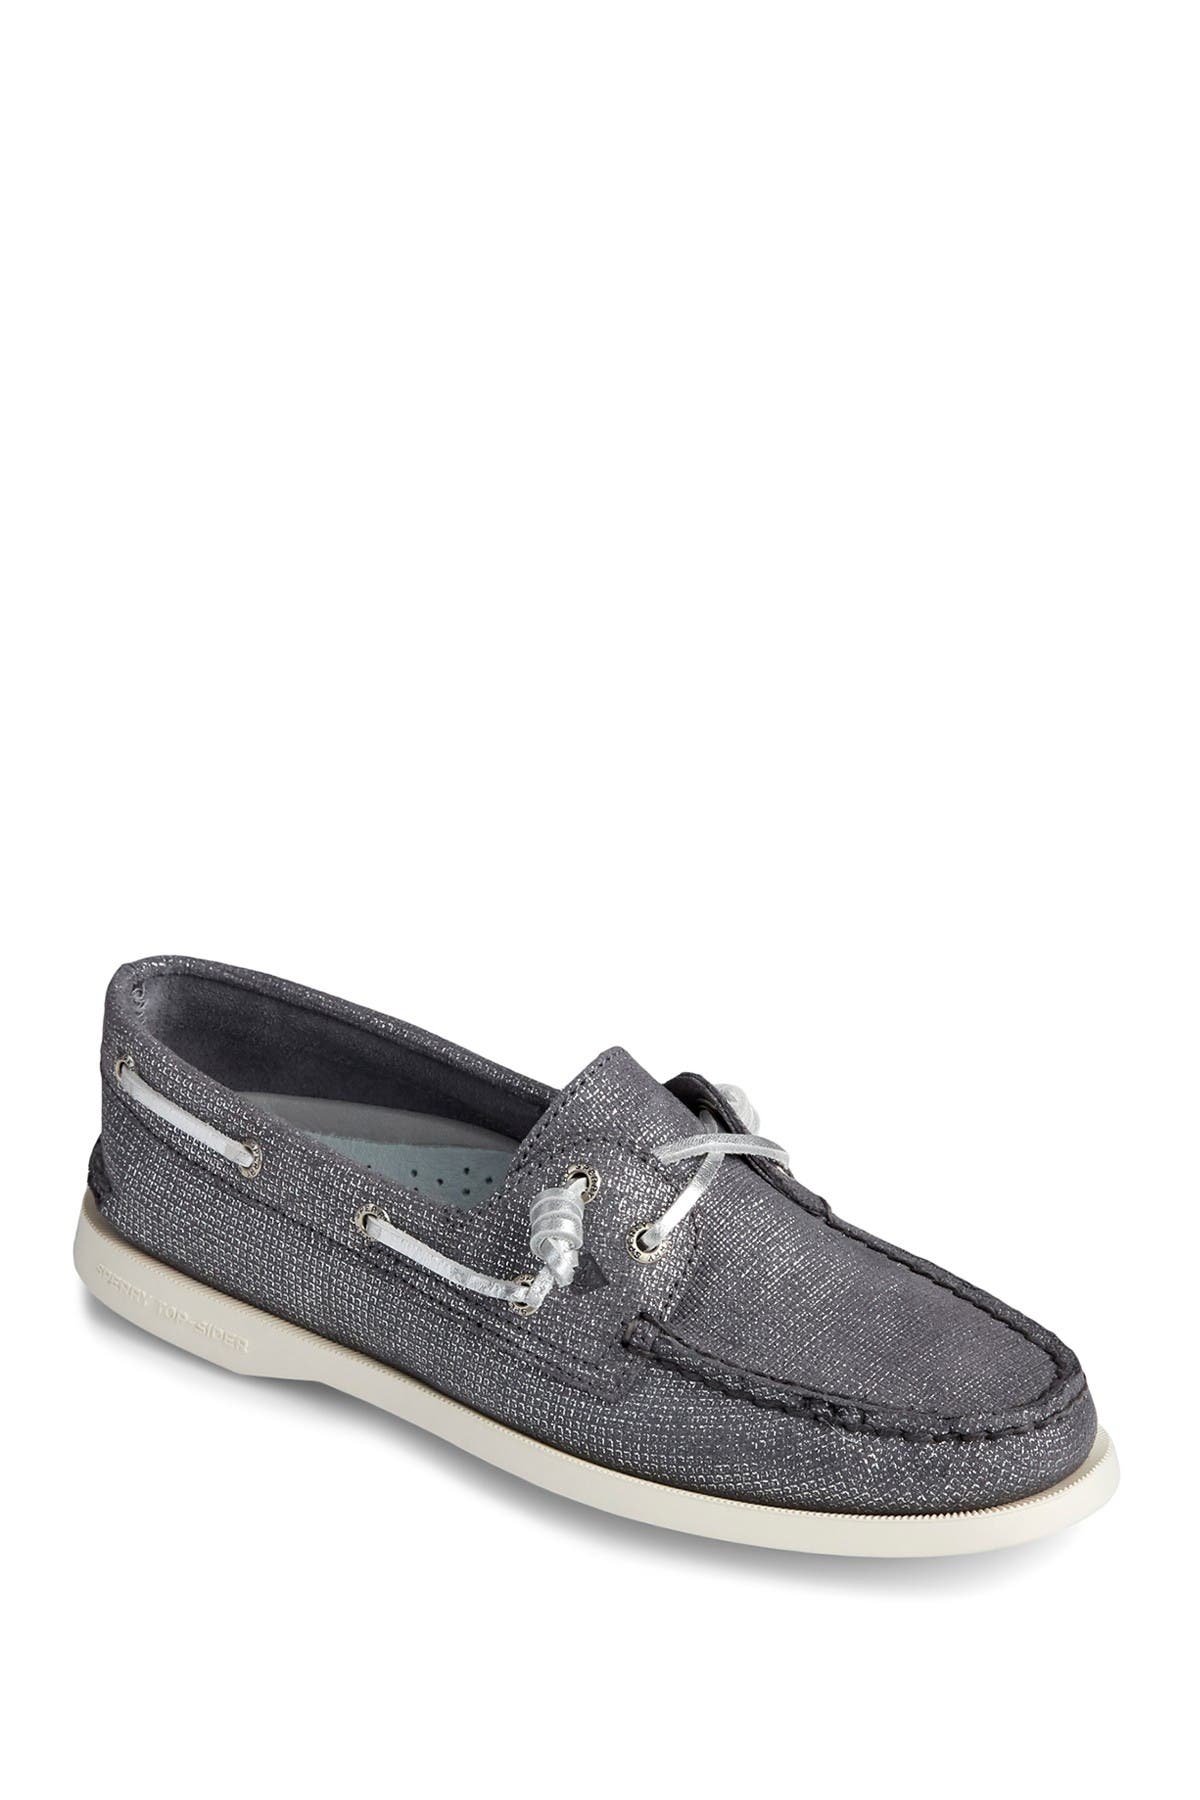 sperry metallic boat shoes